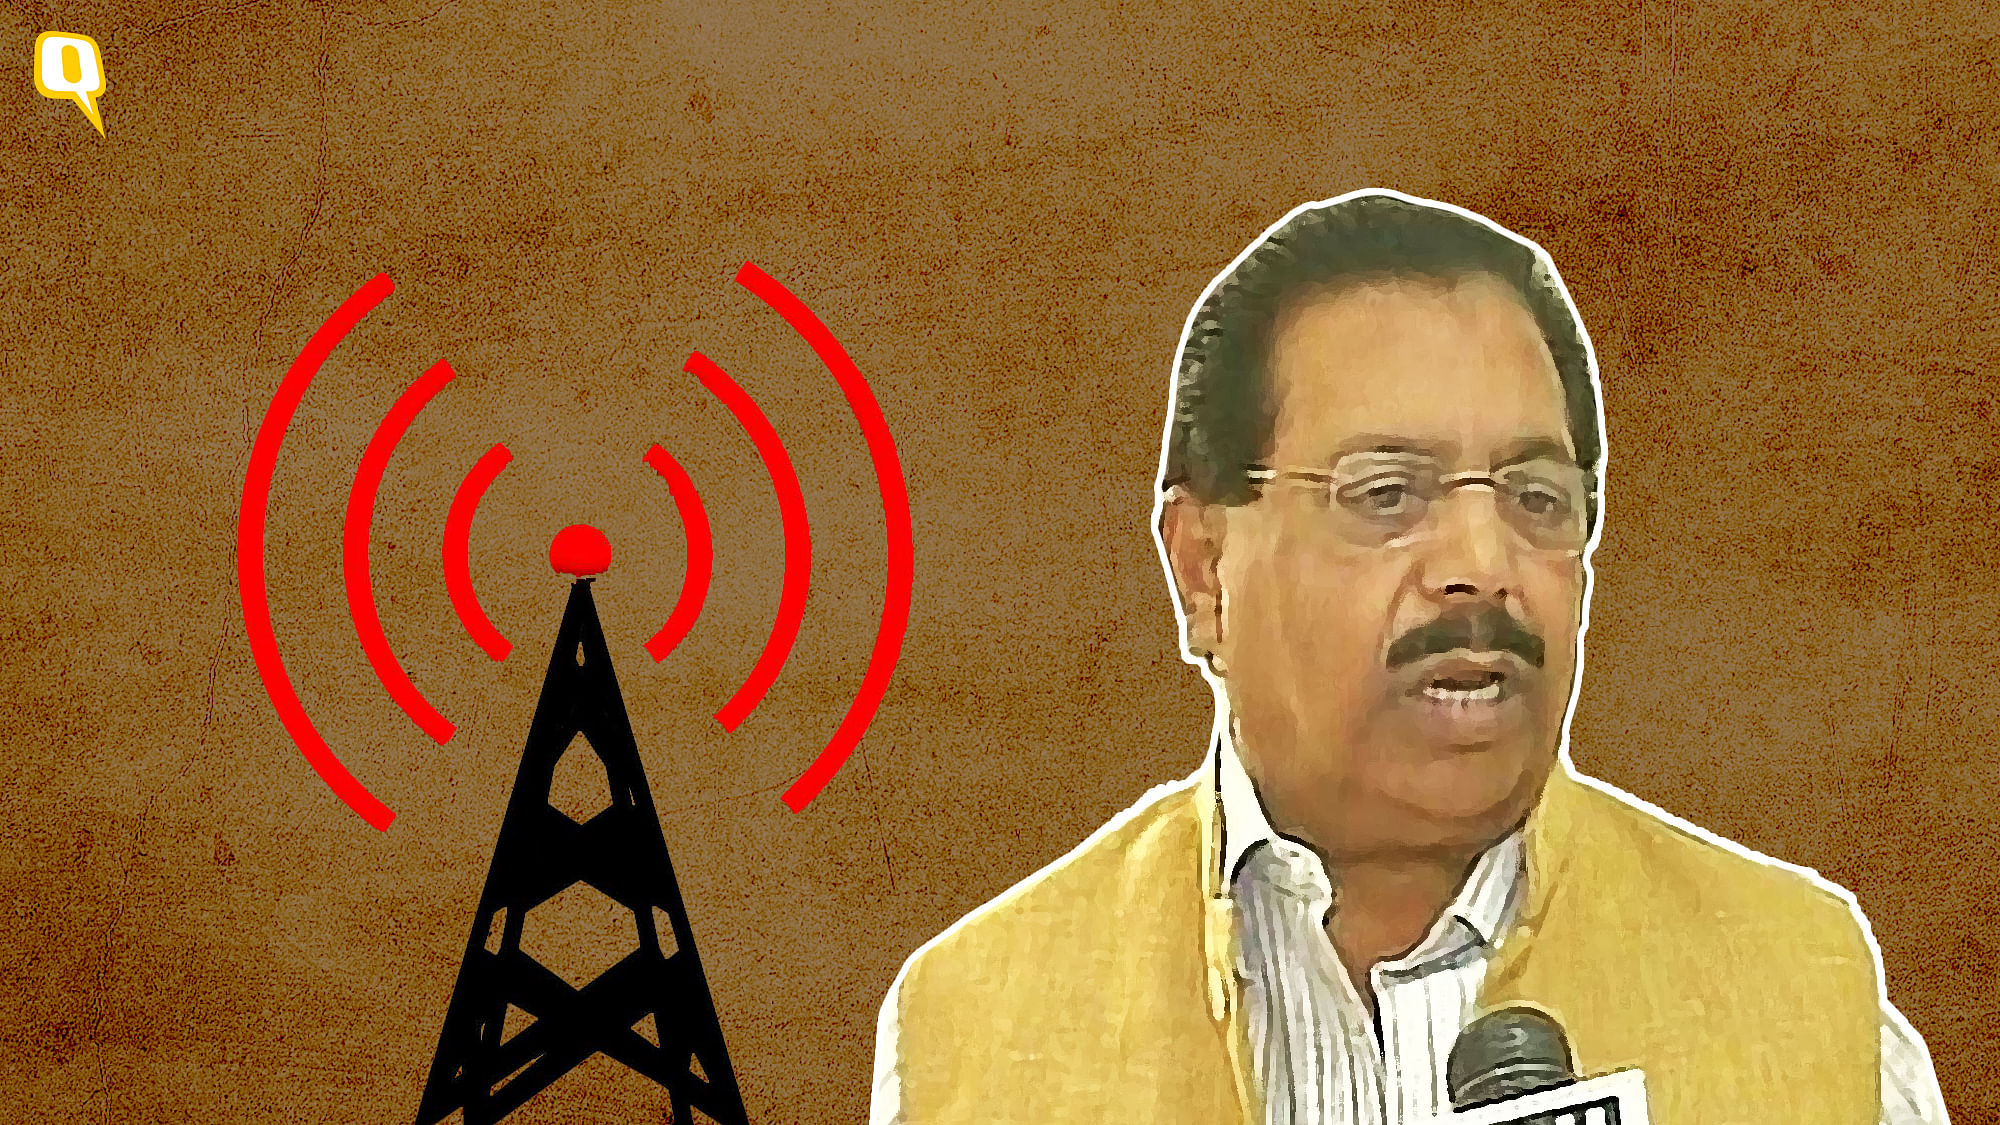 PC Chacko, the chairman of the JPC during the 2G ‘scam’. Image used for representation.